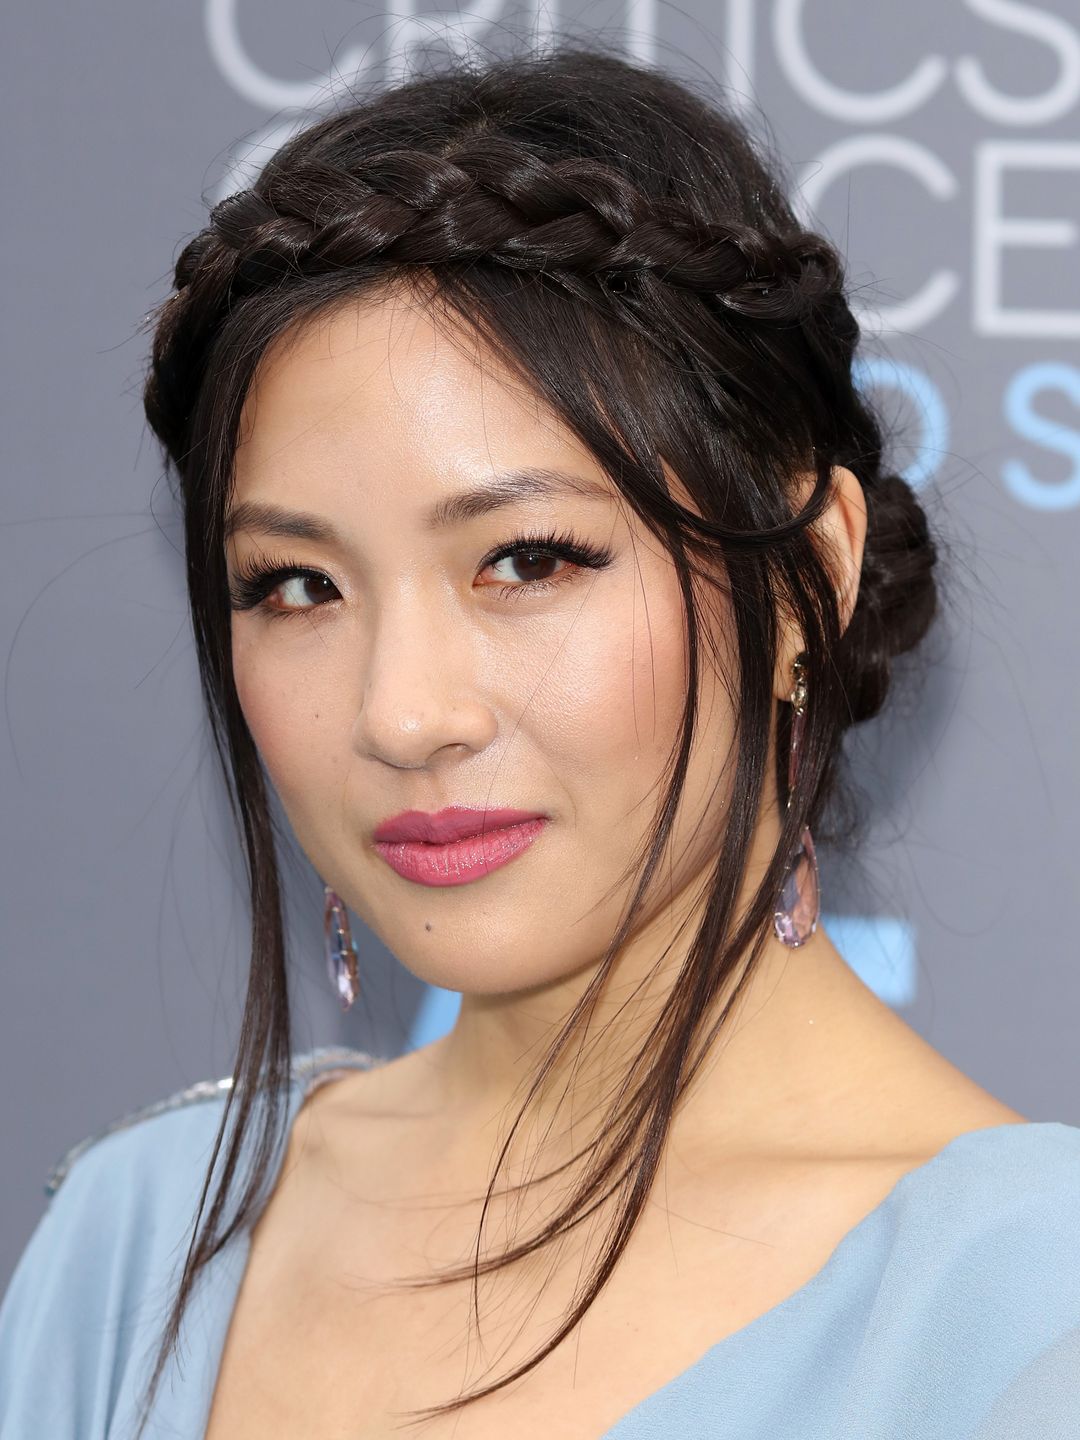 Constance Wu story of success